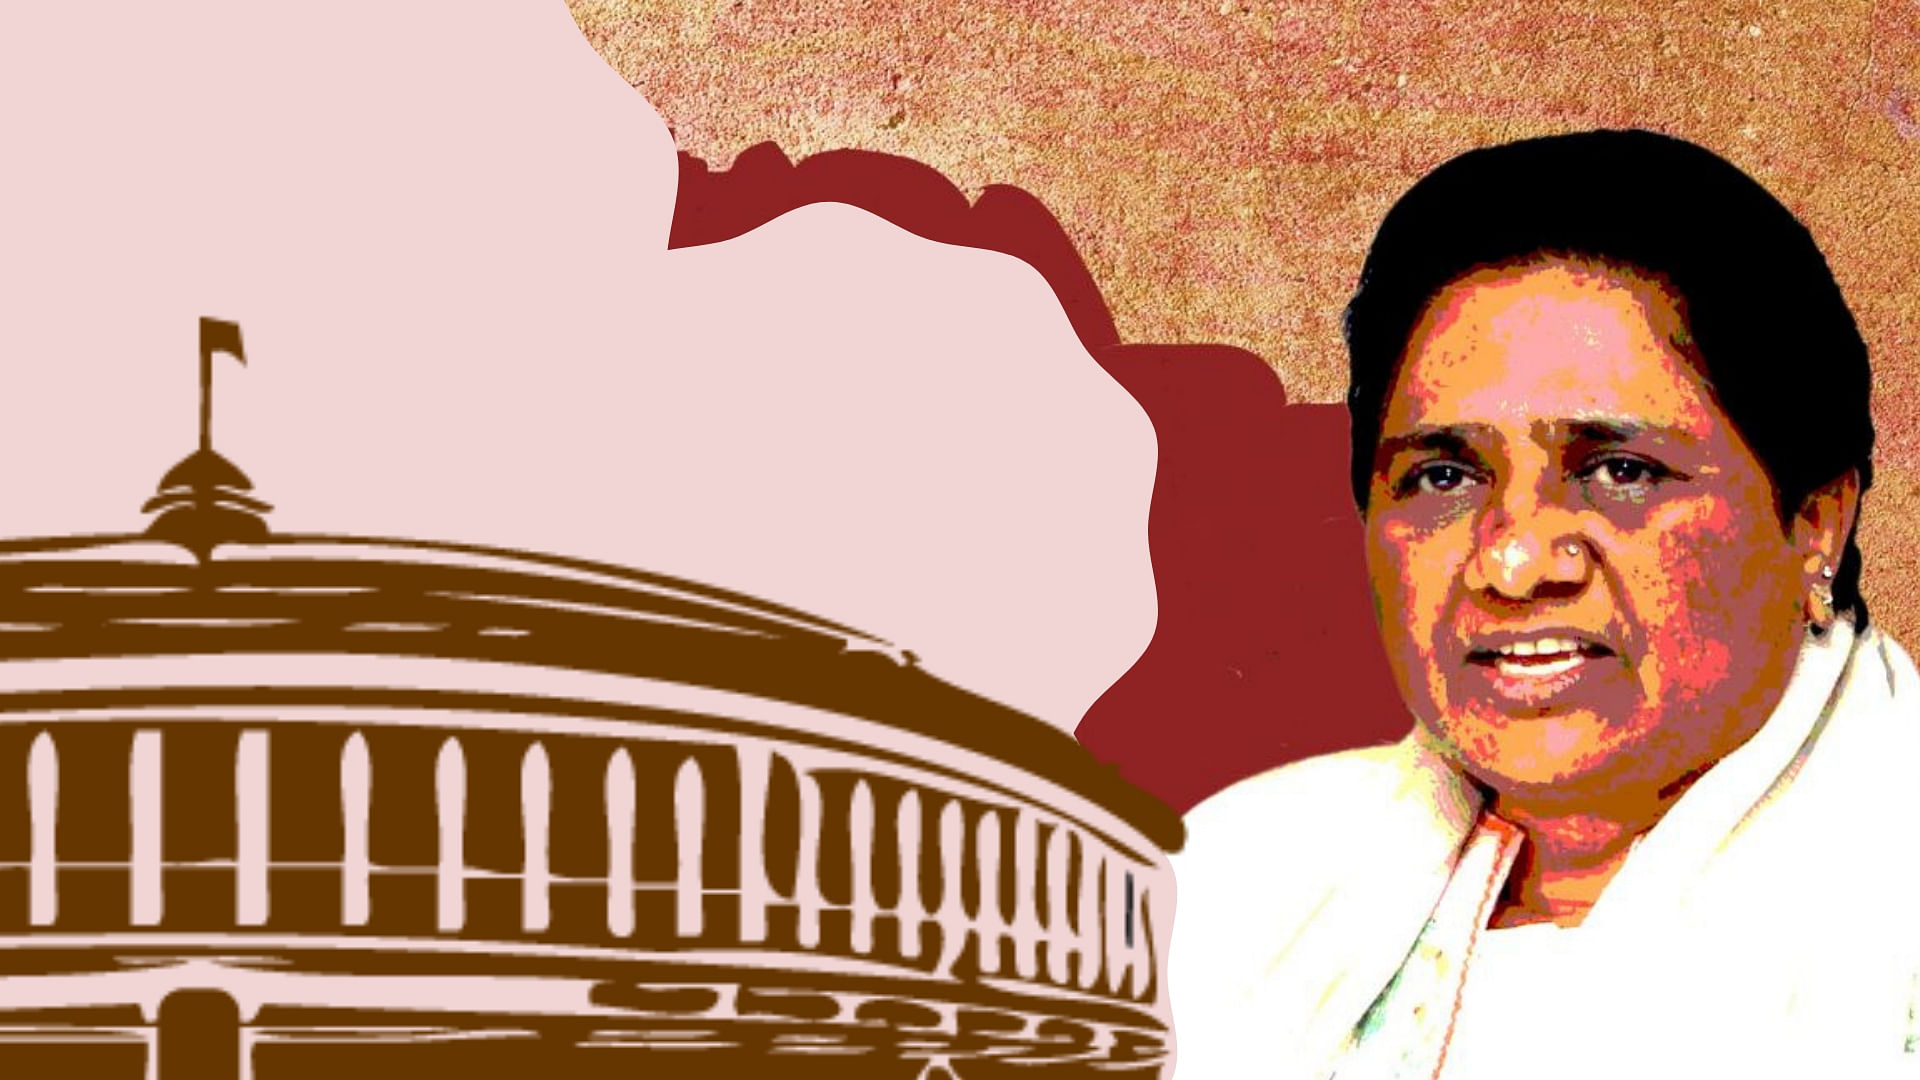 Mayawati  indicated that if she gets a chance to become the Prime Minister, she will contest the Lok Sabha election from Ambedkar Nagar.